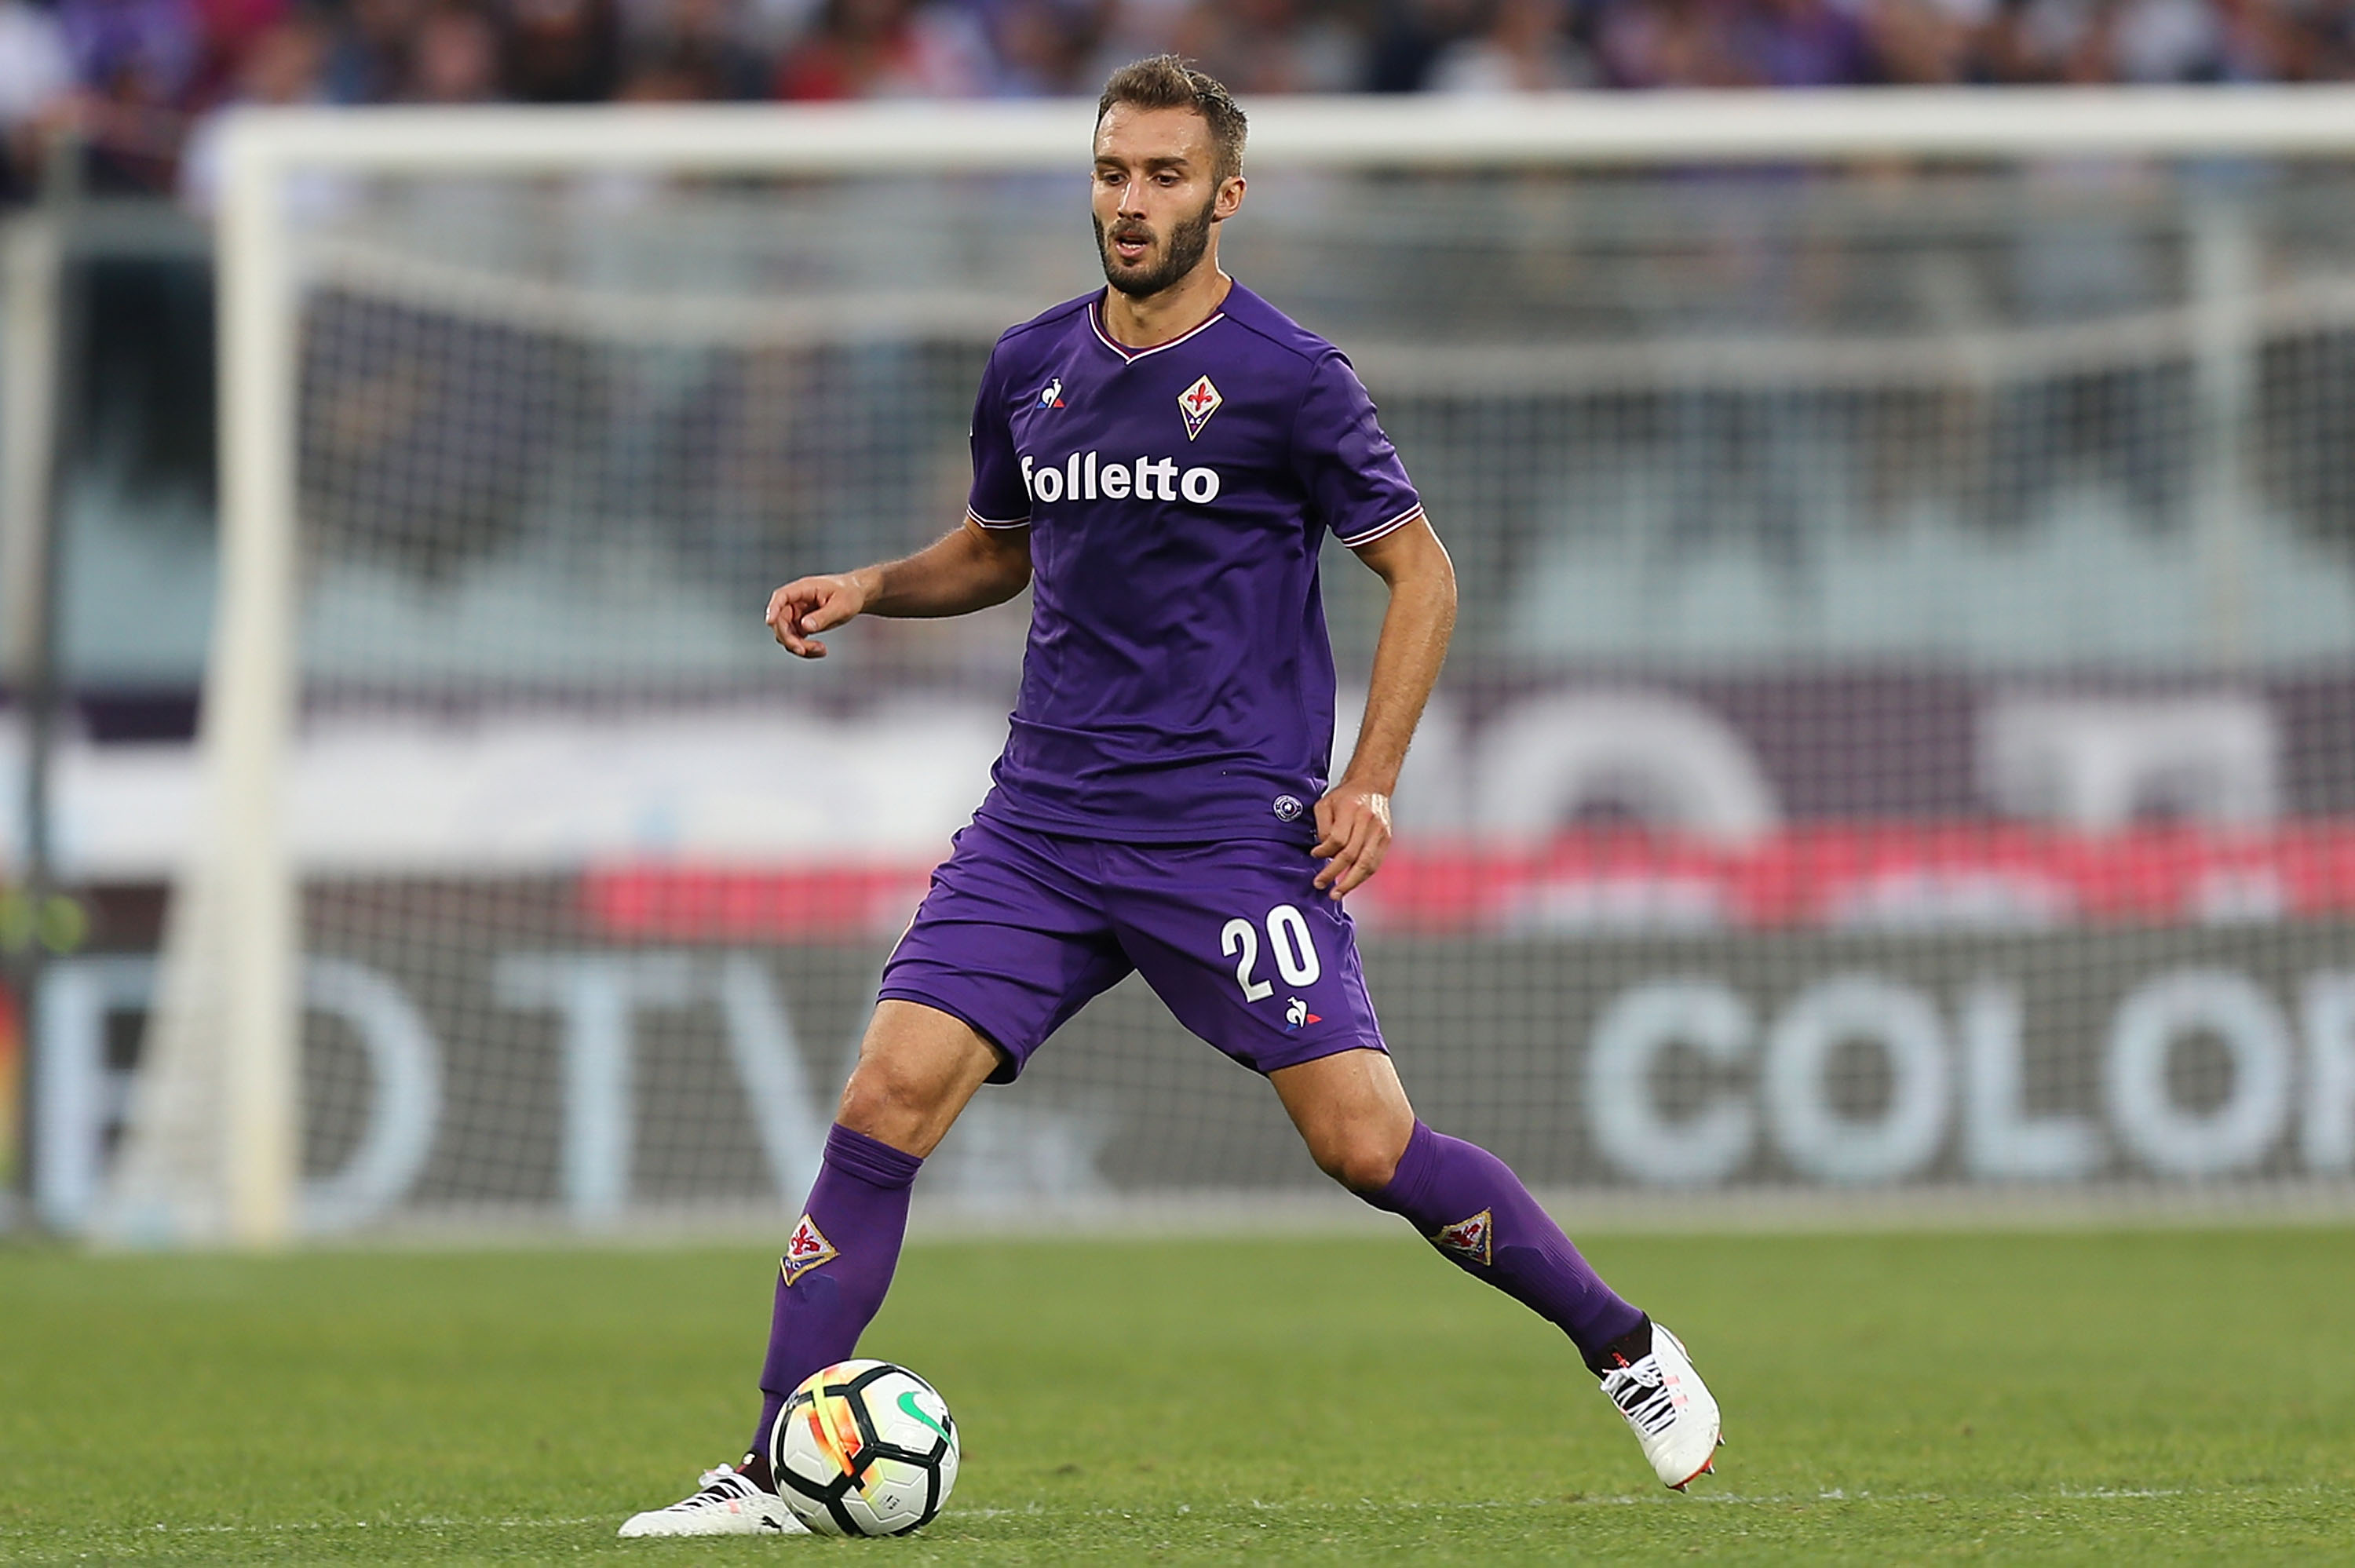 FLORENCE, ITALY - SEPTEMBER 16: German Pezzella of ACF Fiorentina in action during the Serie A match between ACF Fiorentina and Bologna FC at Stadio Artemio Franchi on September 16, 2017 in Florence, Italy.  (Photo by Gabriele Maltinti/Getty Images)